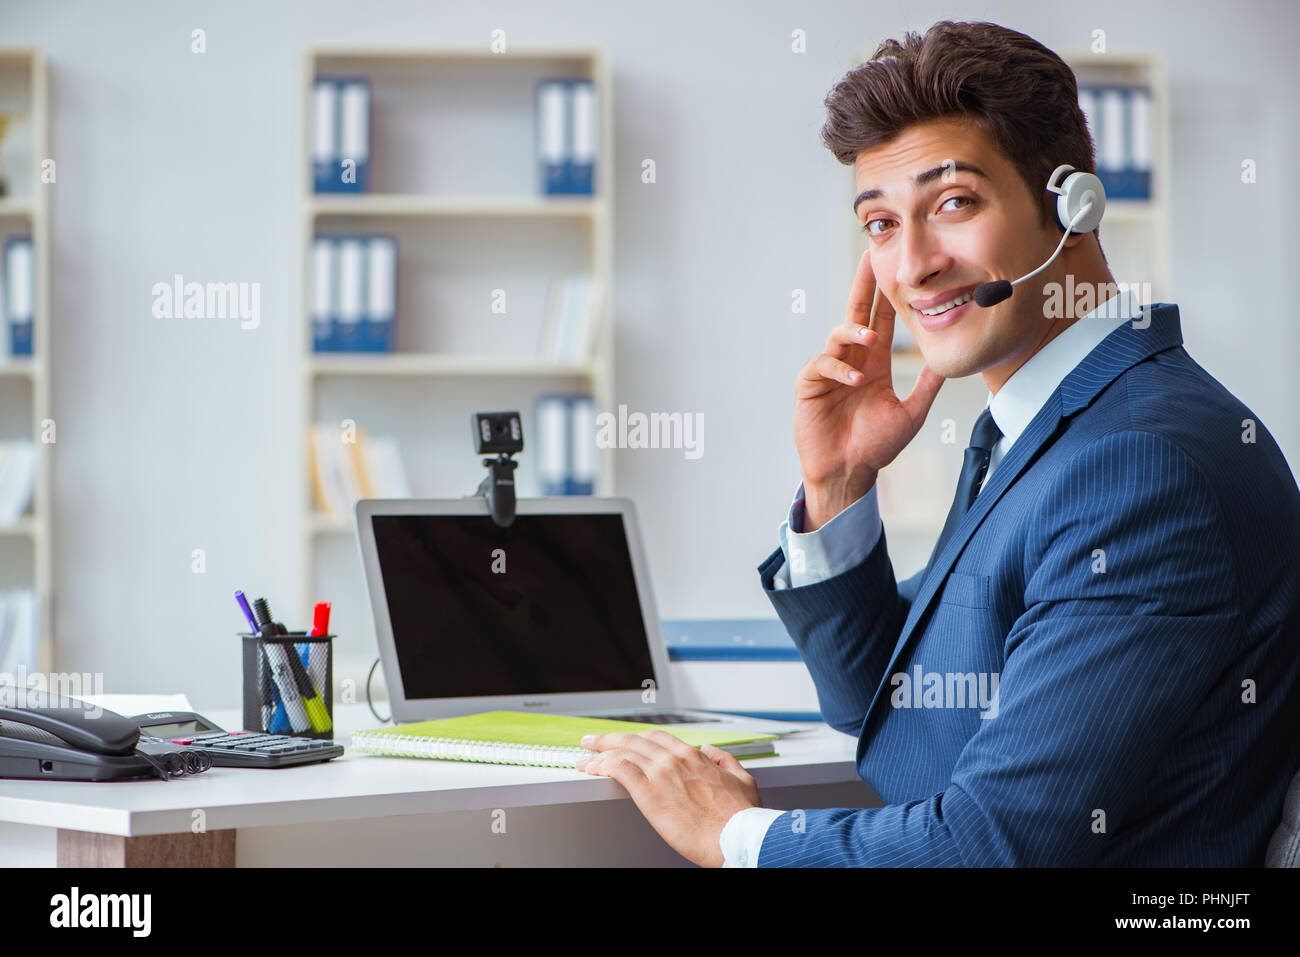 Young Help Desk Operator Working In Office Stock Photo 217449116